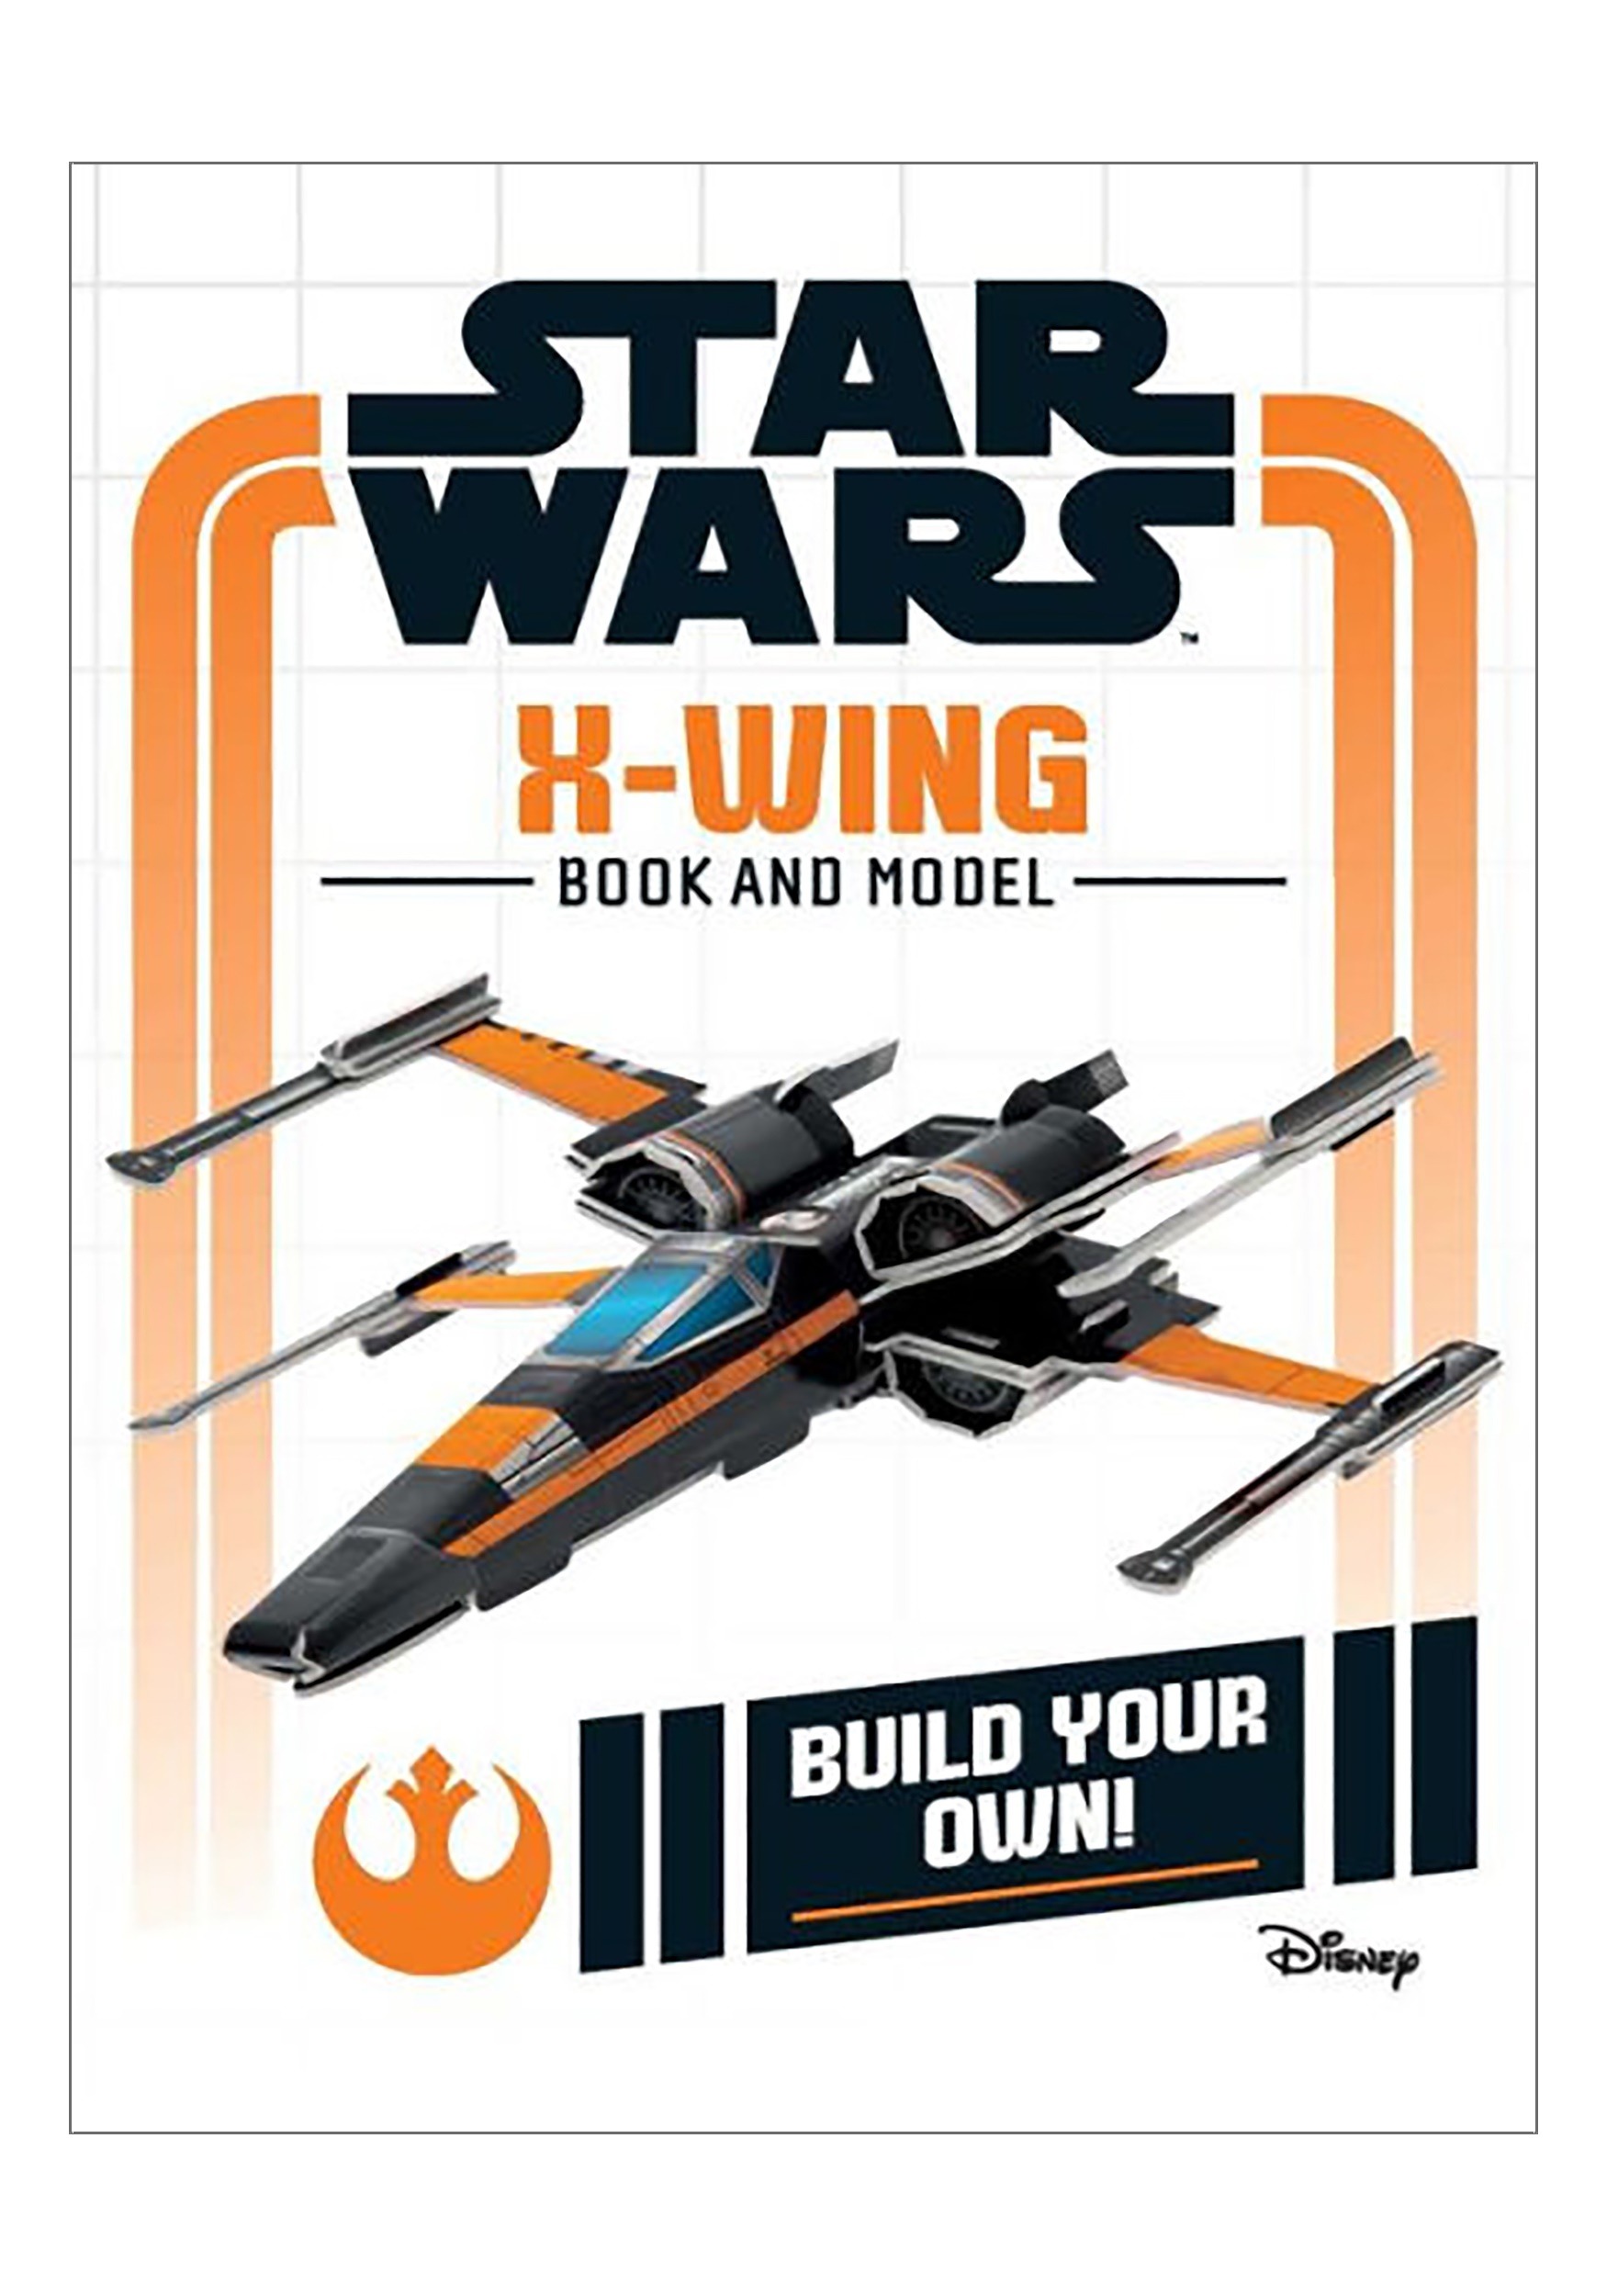 build your own model kits